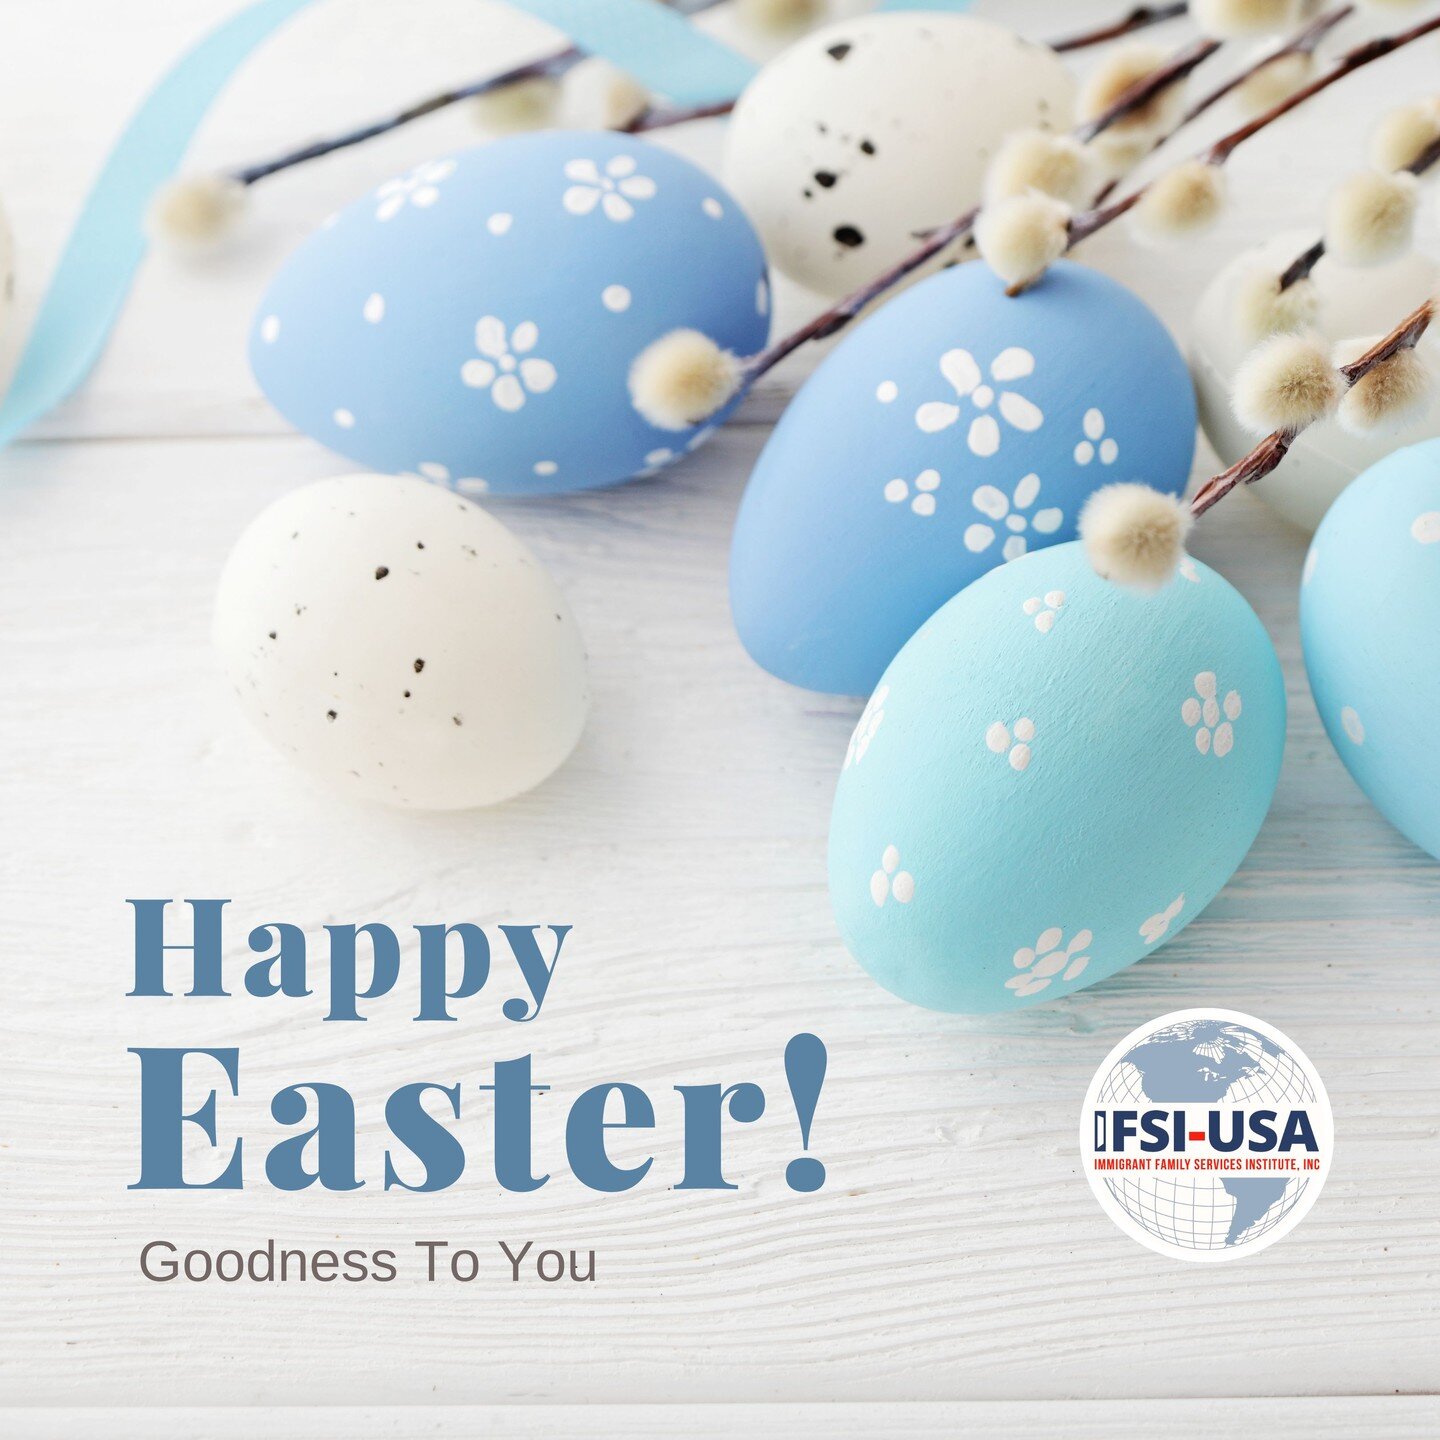 Easter is a time for new beginnings. Wishing you warmth, hope, and health this holiday season. Happy Easter!
 #happyeaster2024 #love #newcomer #IFSI #onelove #easter